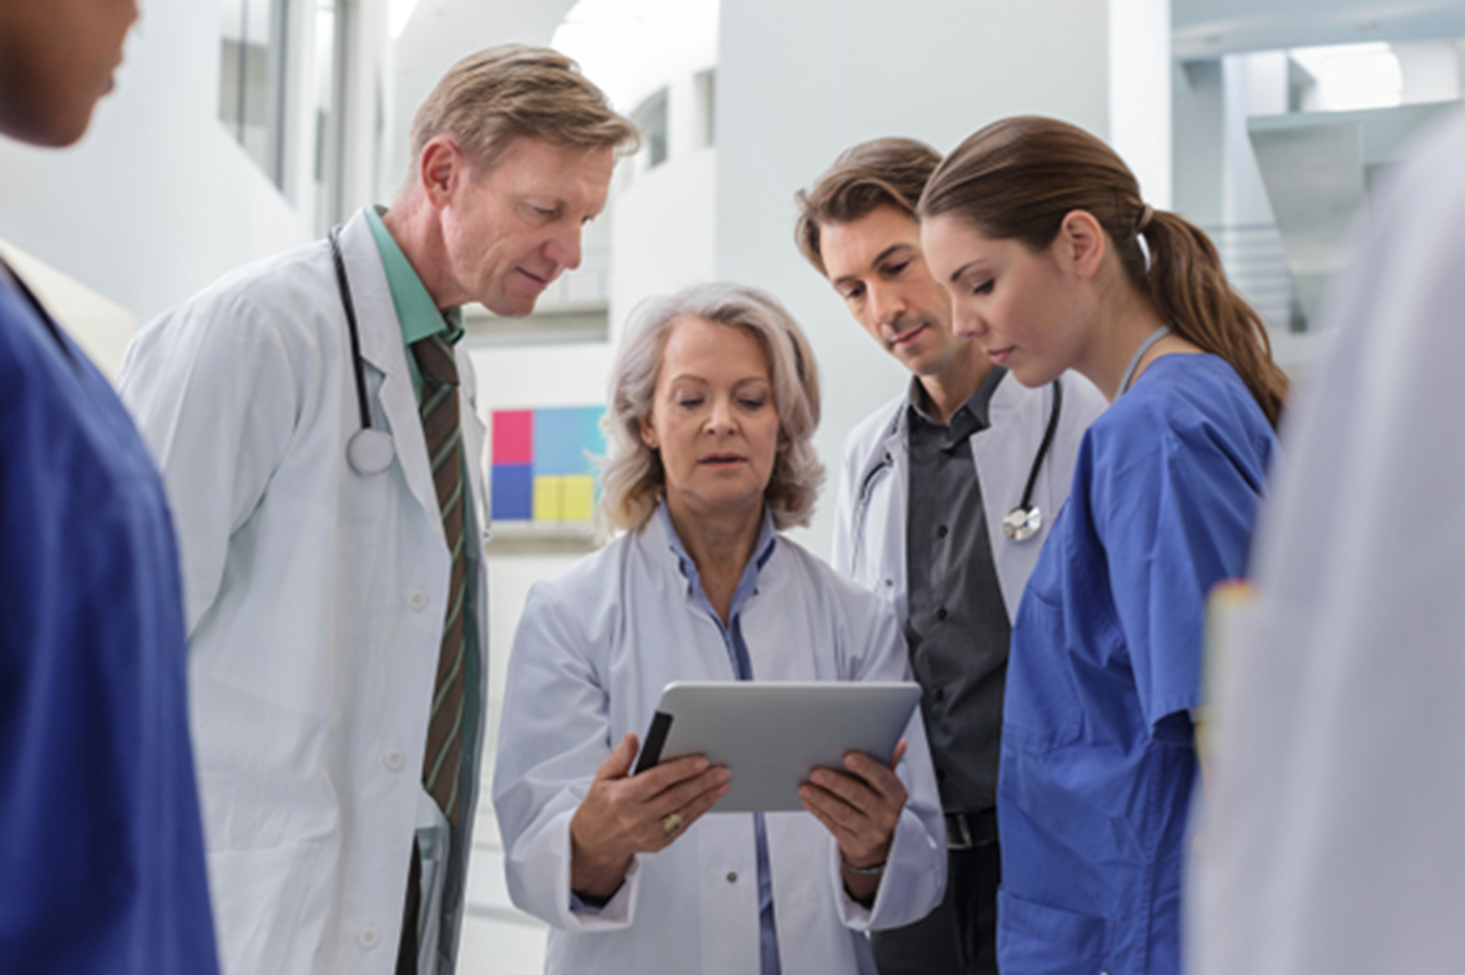 doctors and nurses huddled around a tablet